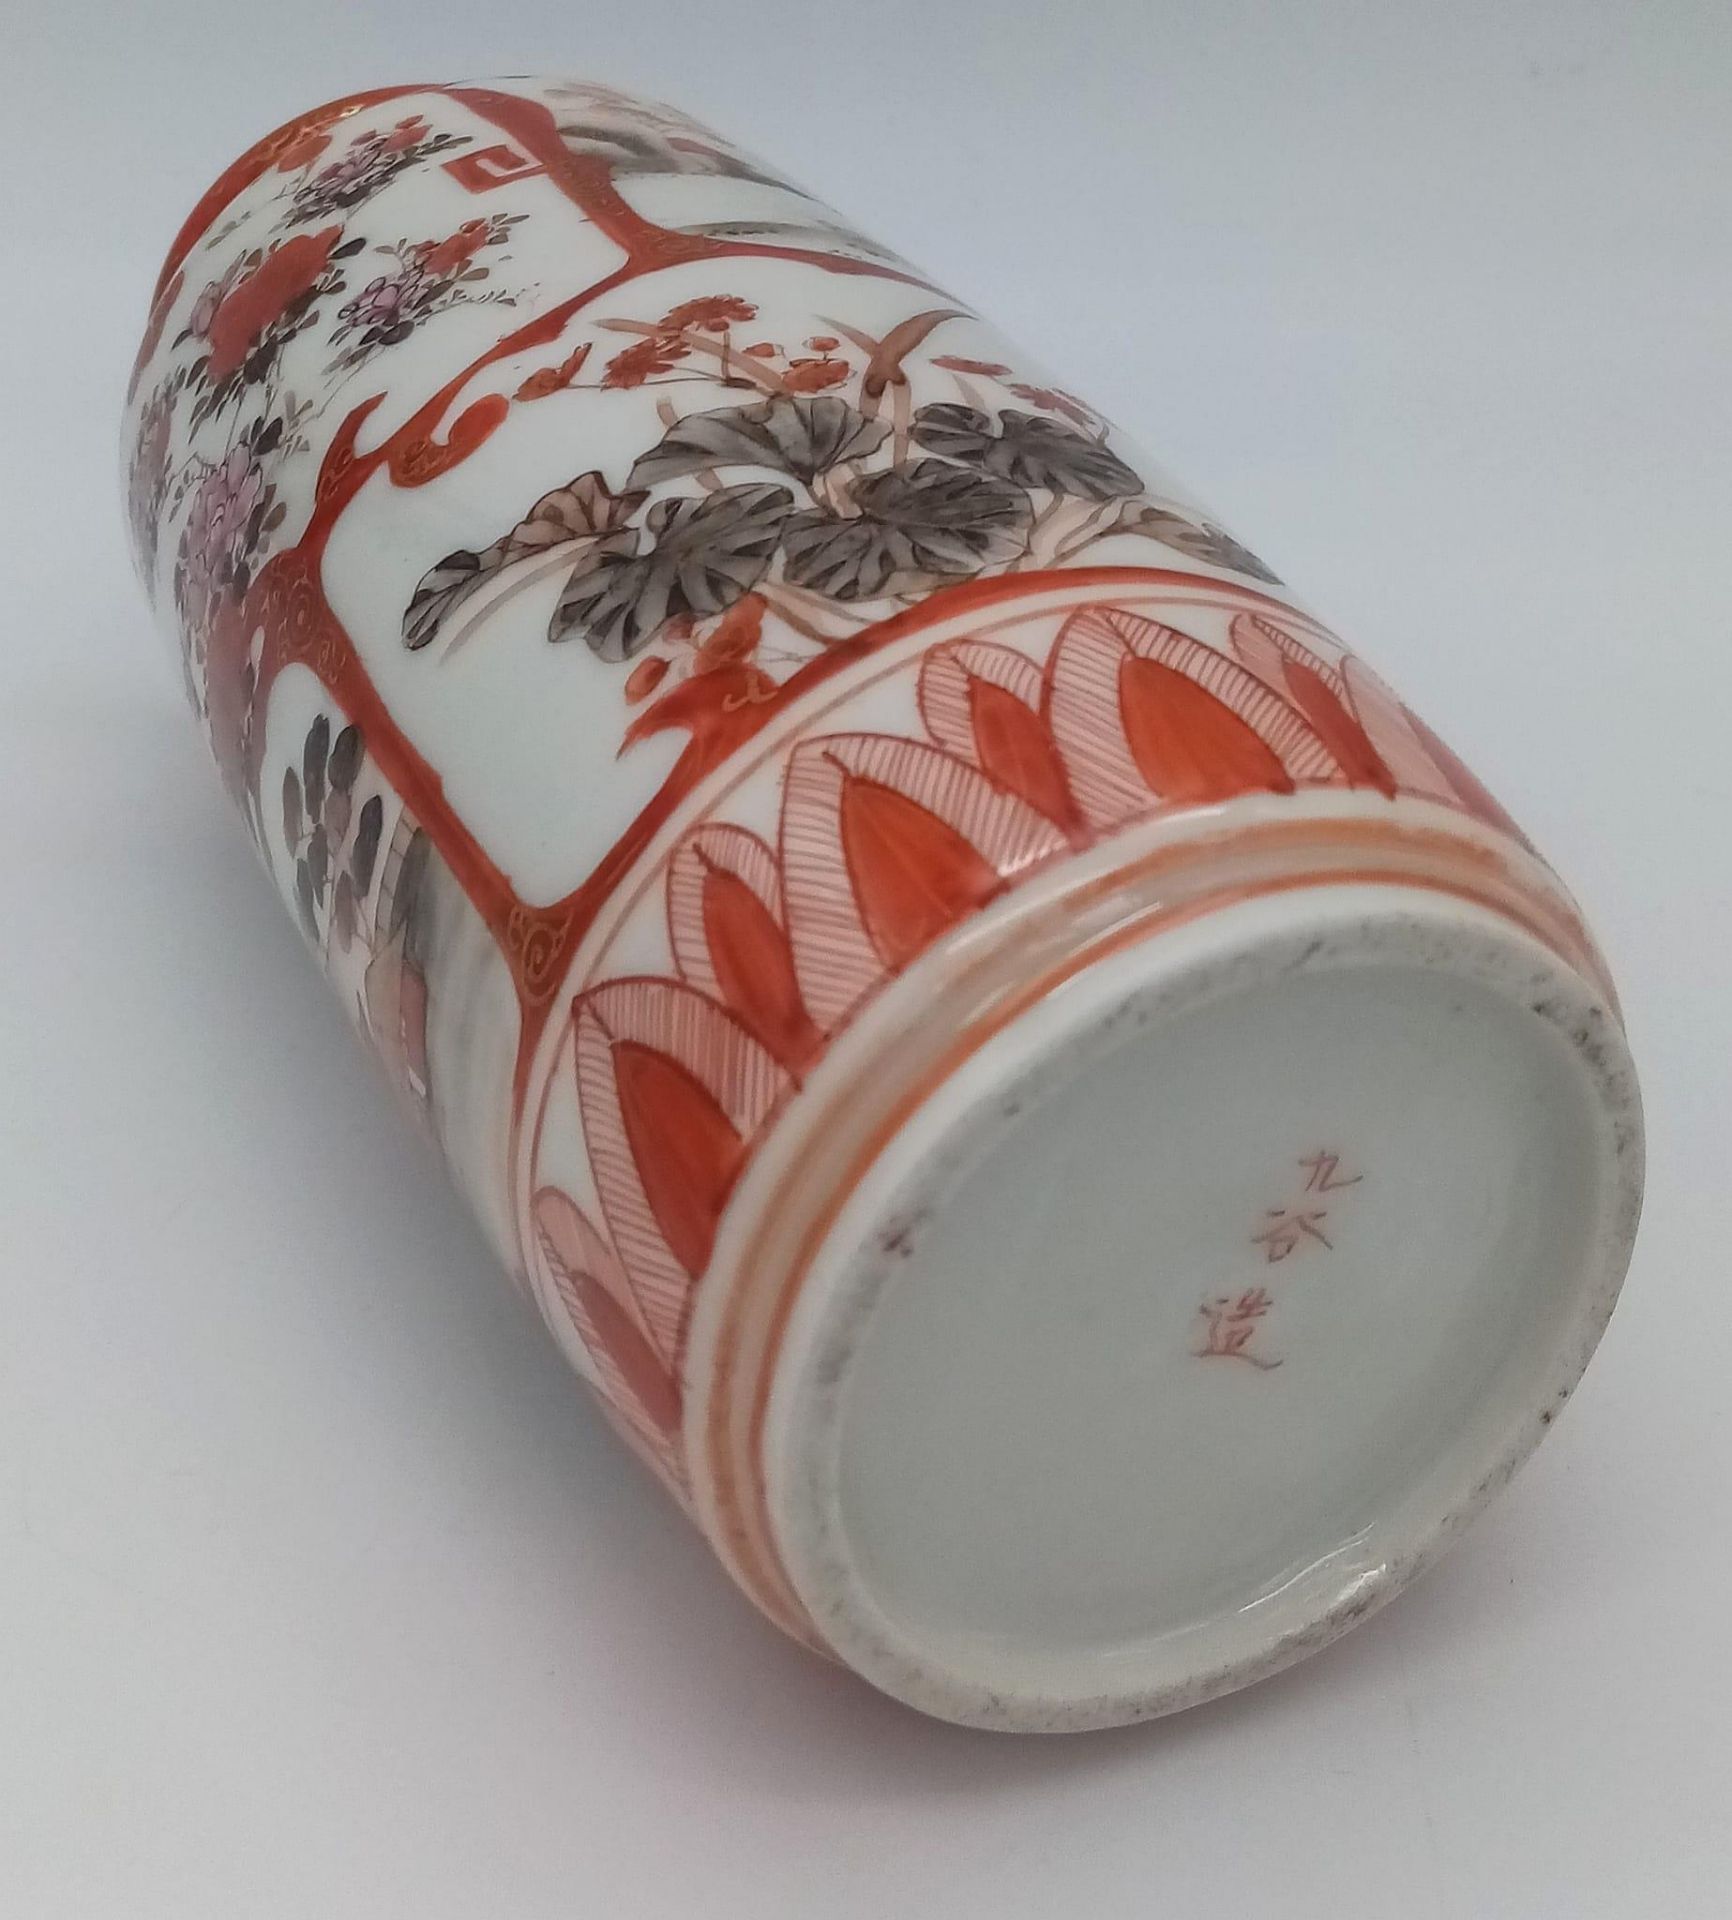 A SMALL SATSUMA VASE WITH ORIENTAL THEMED PATTERNS . 17cms TALL - Image 5 of 6